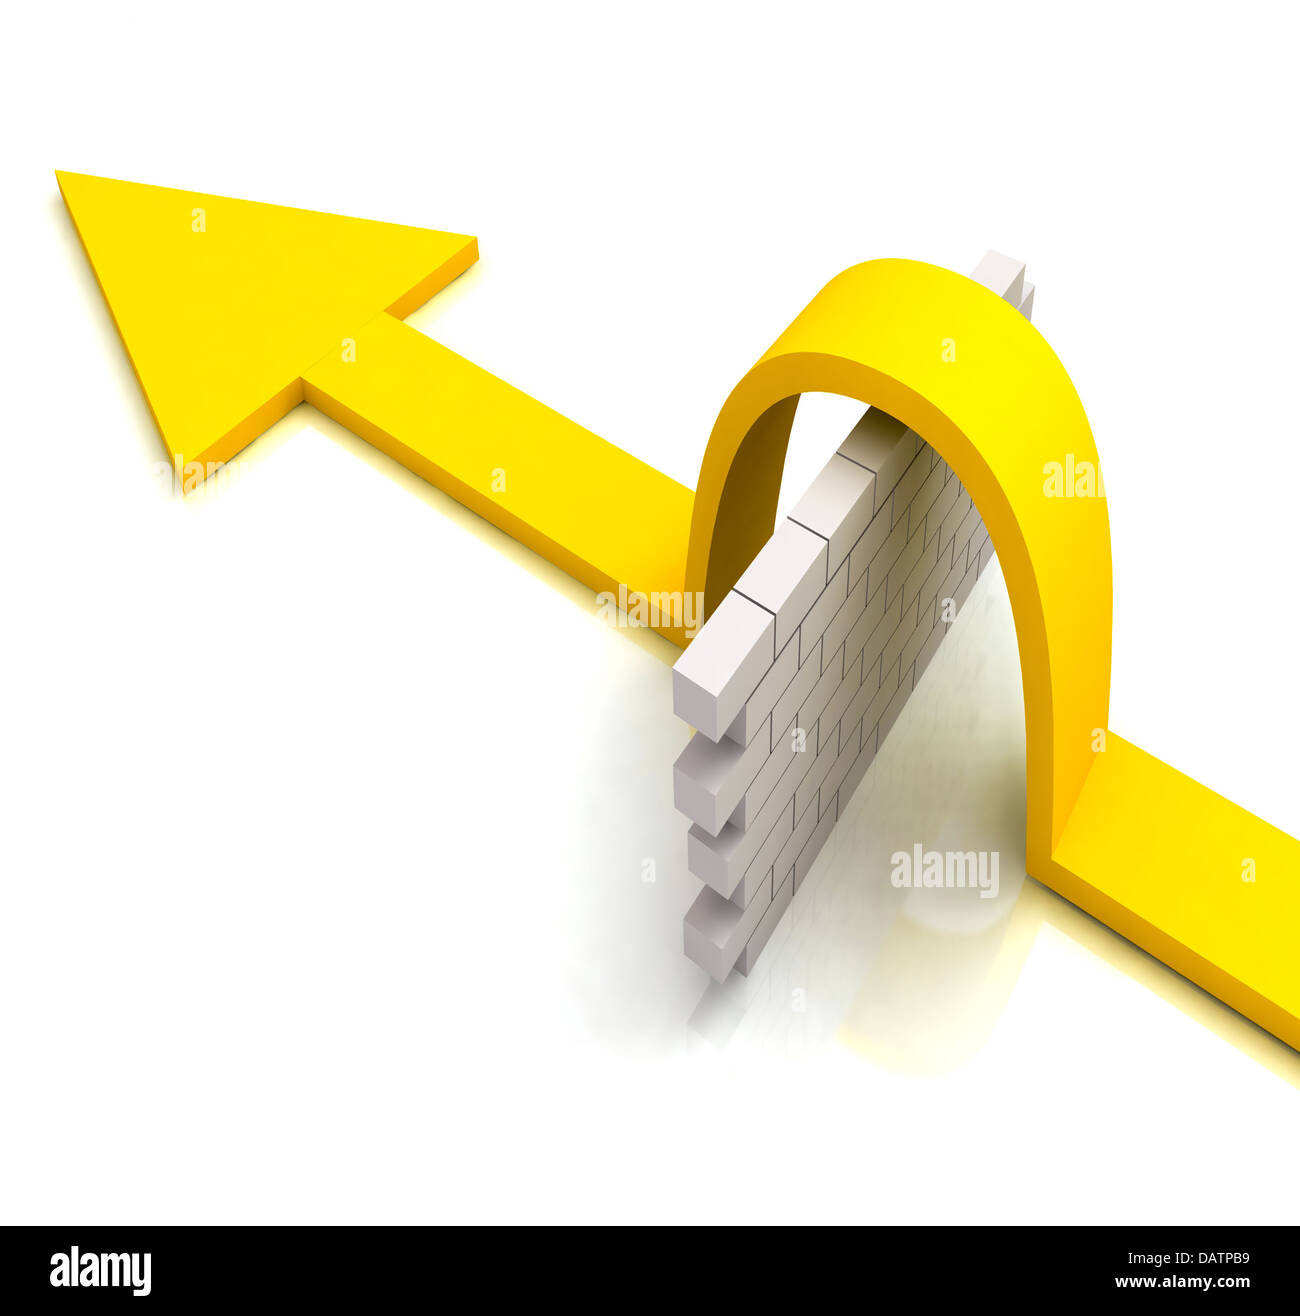 Yellow Arrow Over Wall Means Overcome Obstacles Stock Photo